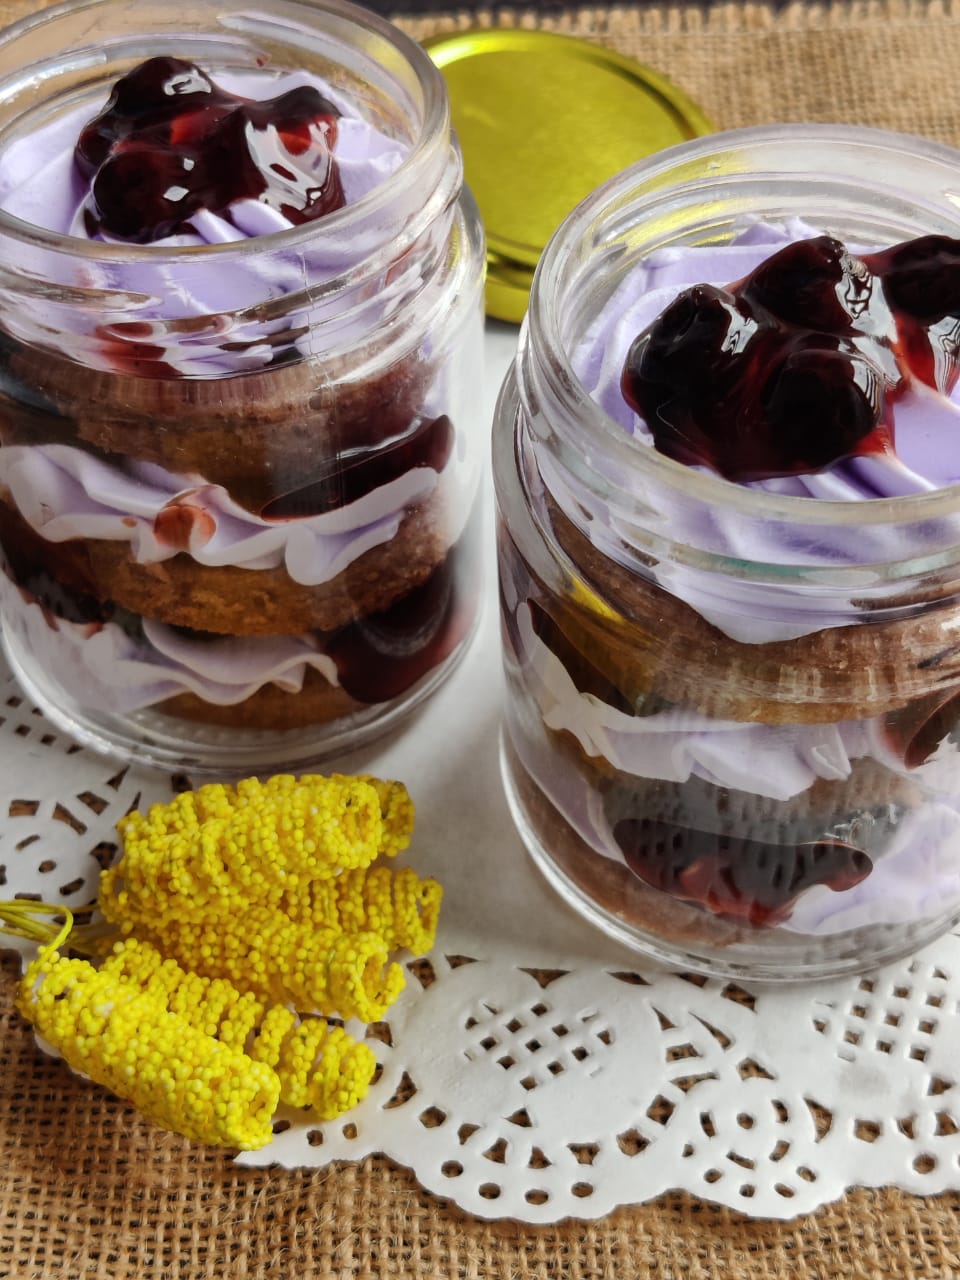 Blueberry Dessert Jar - Set of 2 (Delivery only in Chennai)